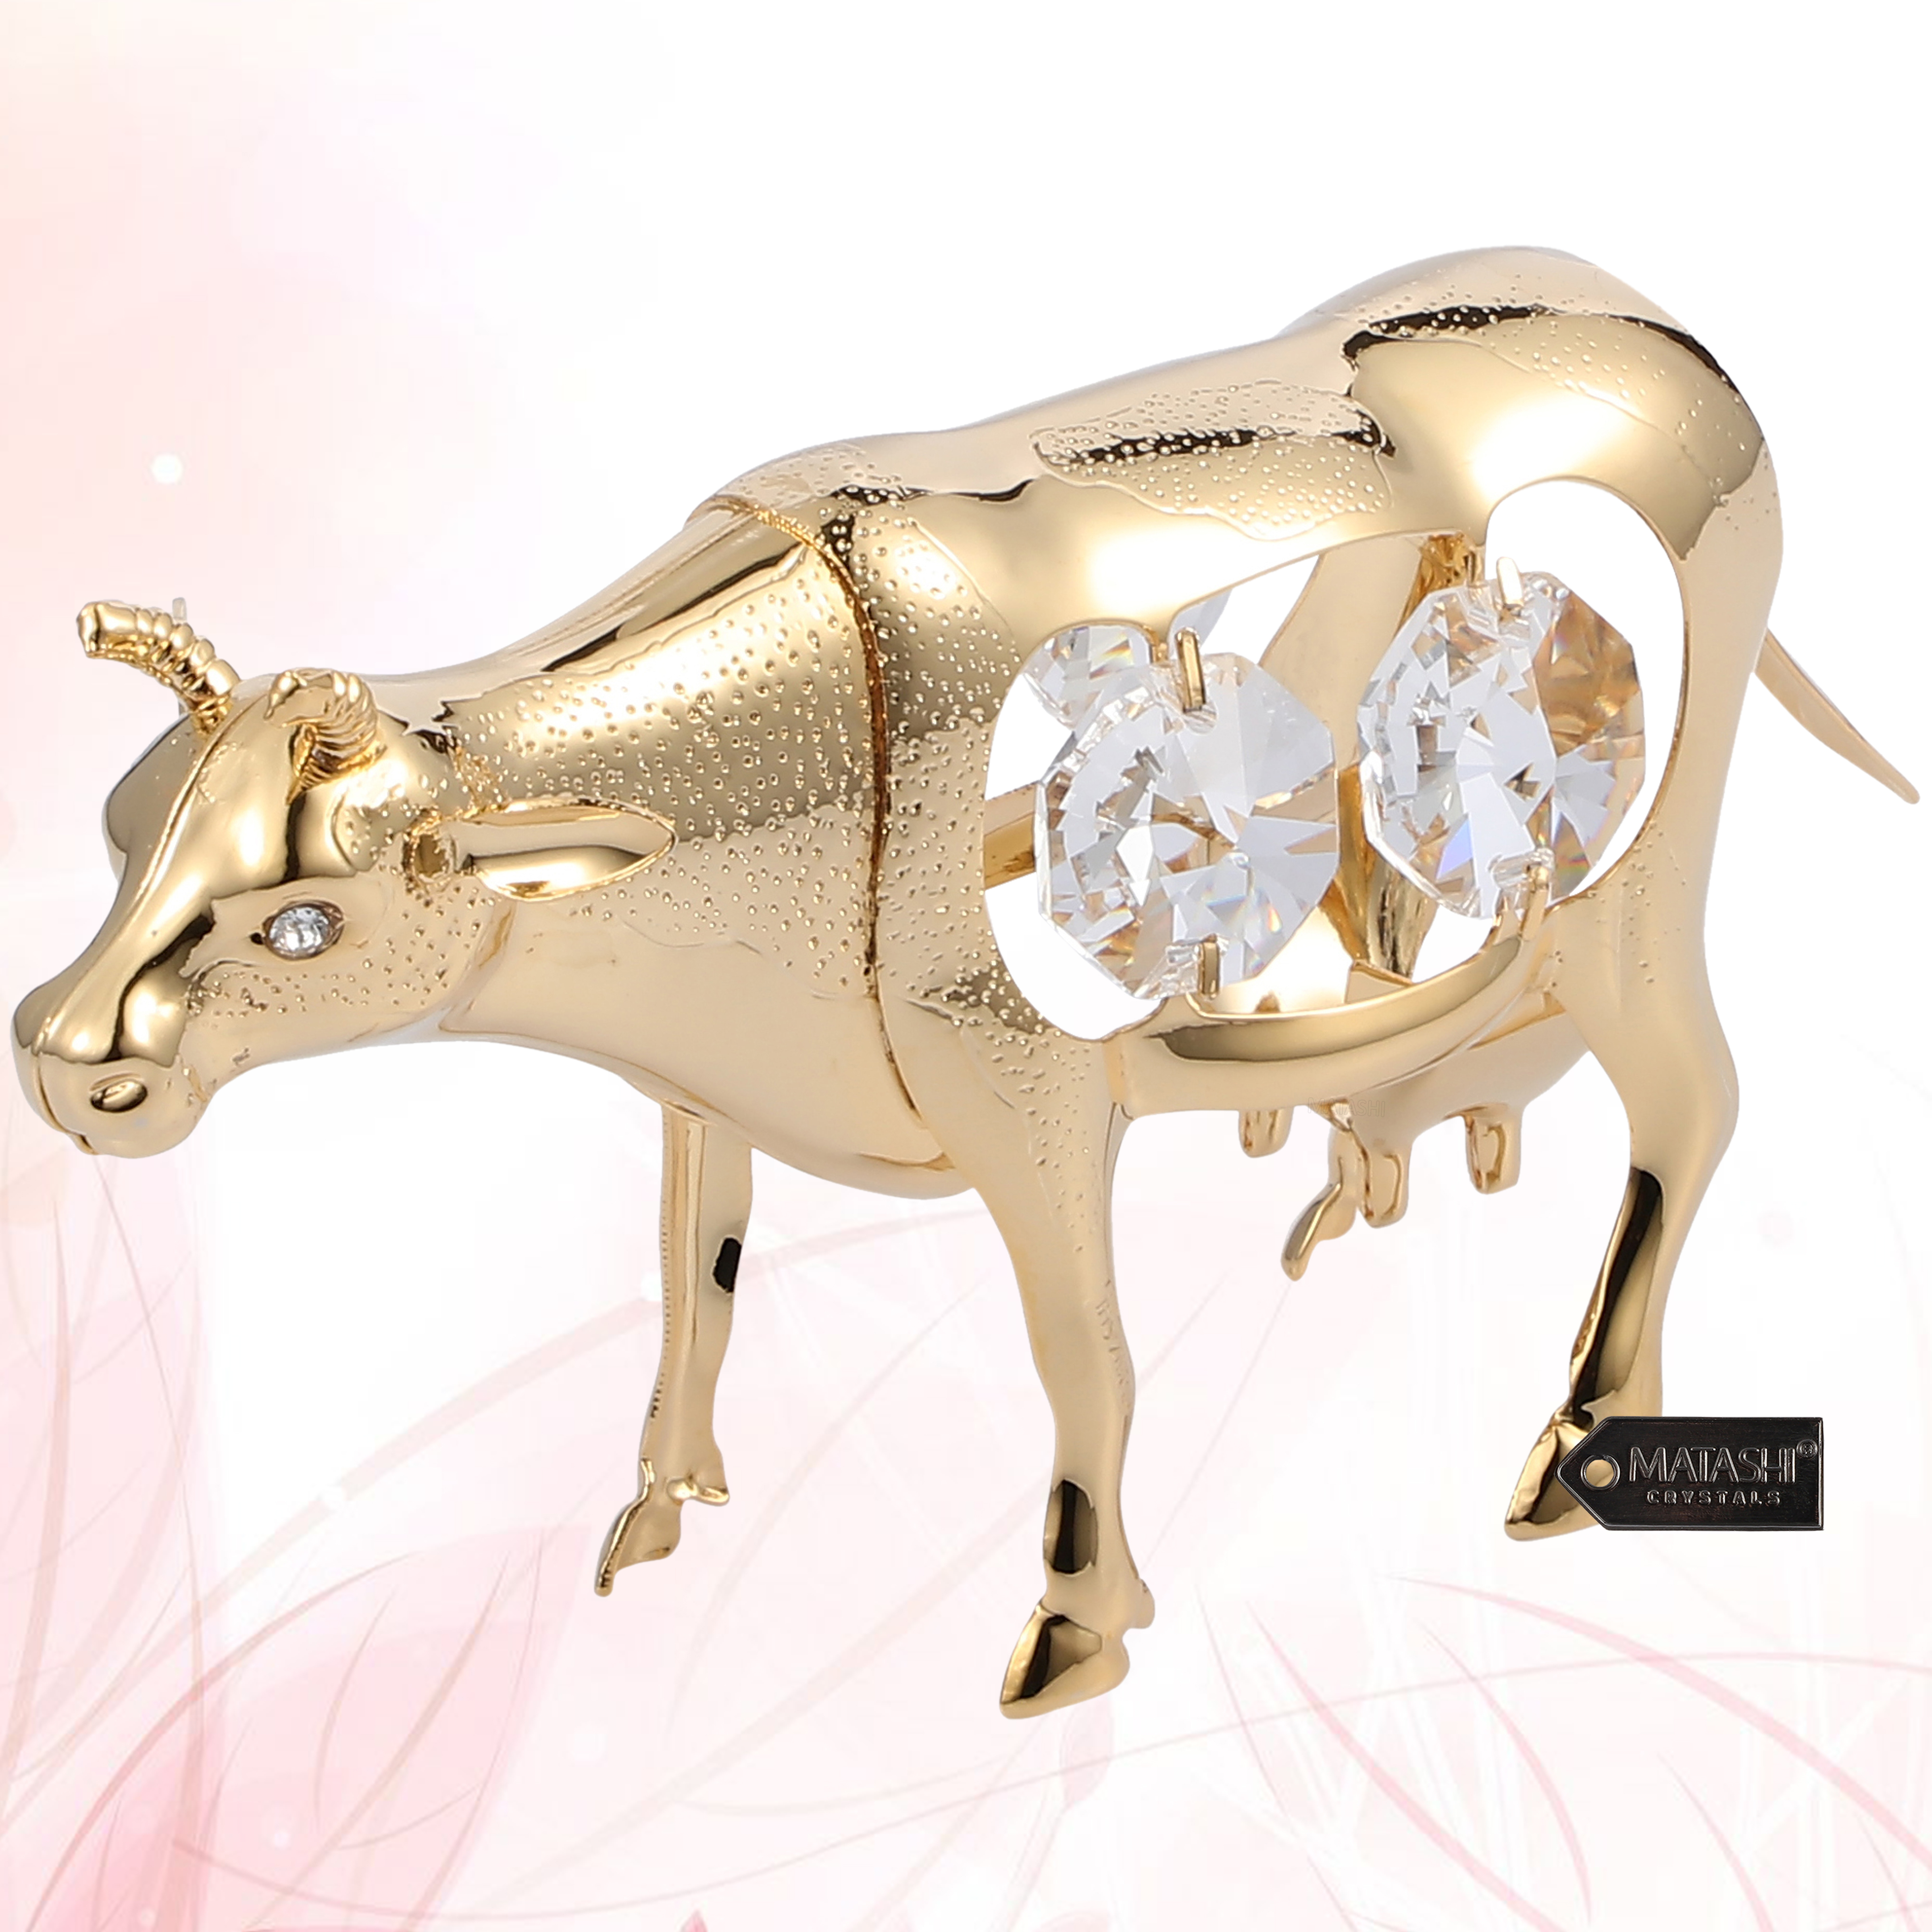 Matashi 24K Gold Plated Crystal Studded Cow Figurine Ornament Tabletop Showpiece Gifts For Birthday, Mother's Day, Christmas, Anniversary